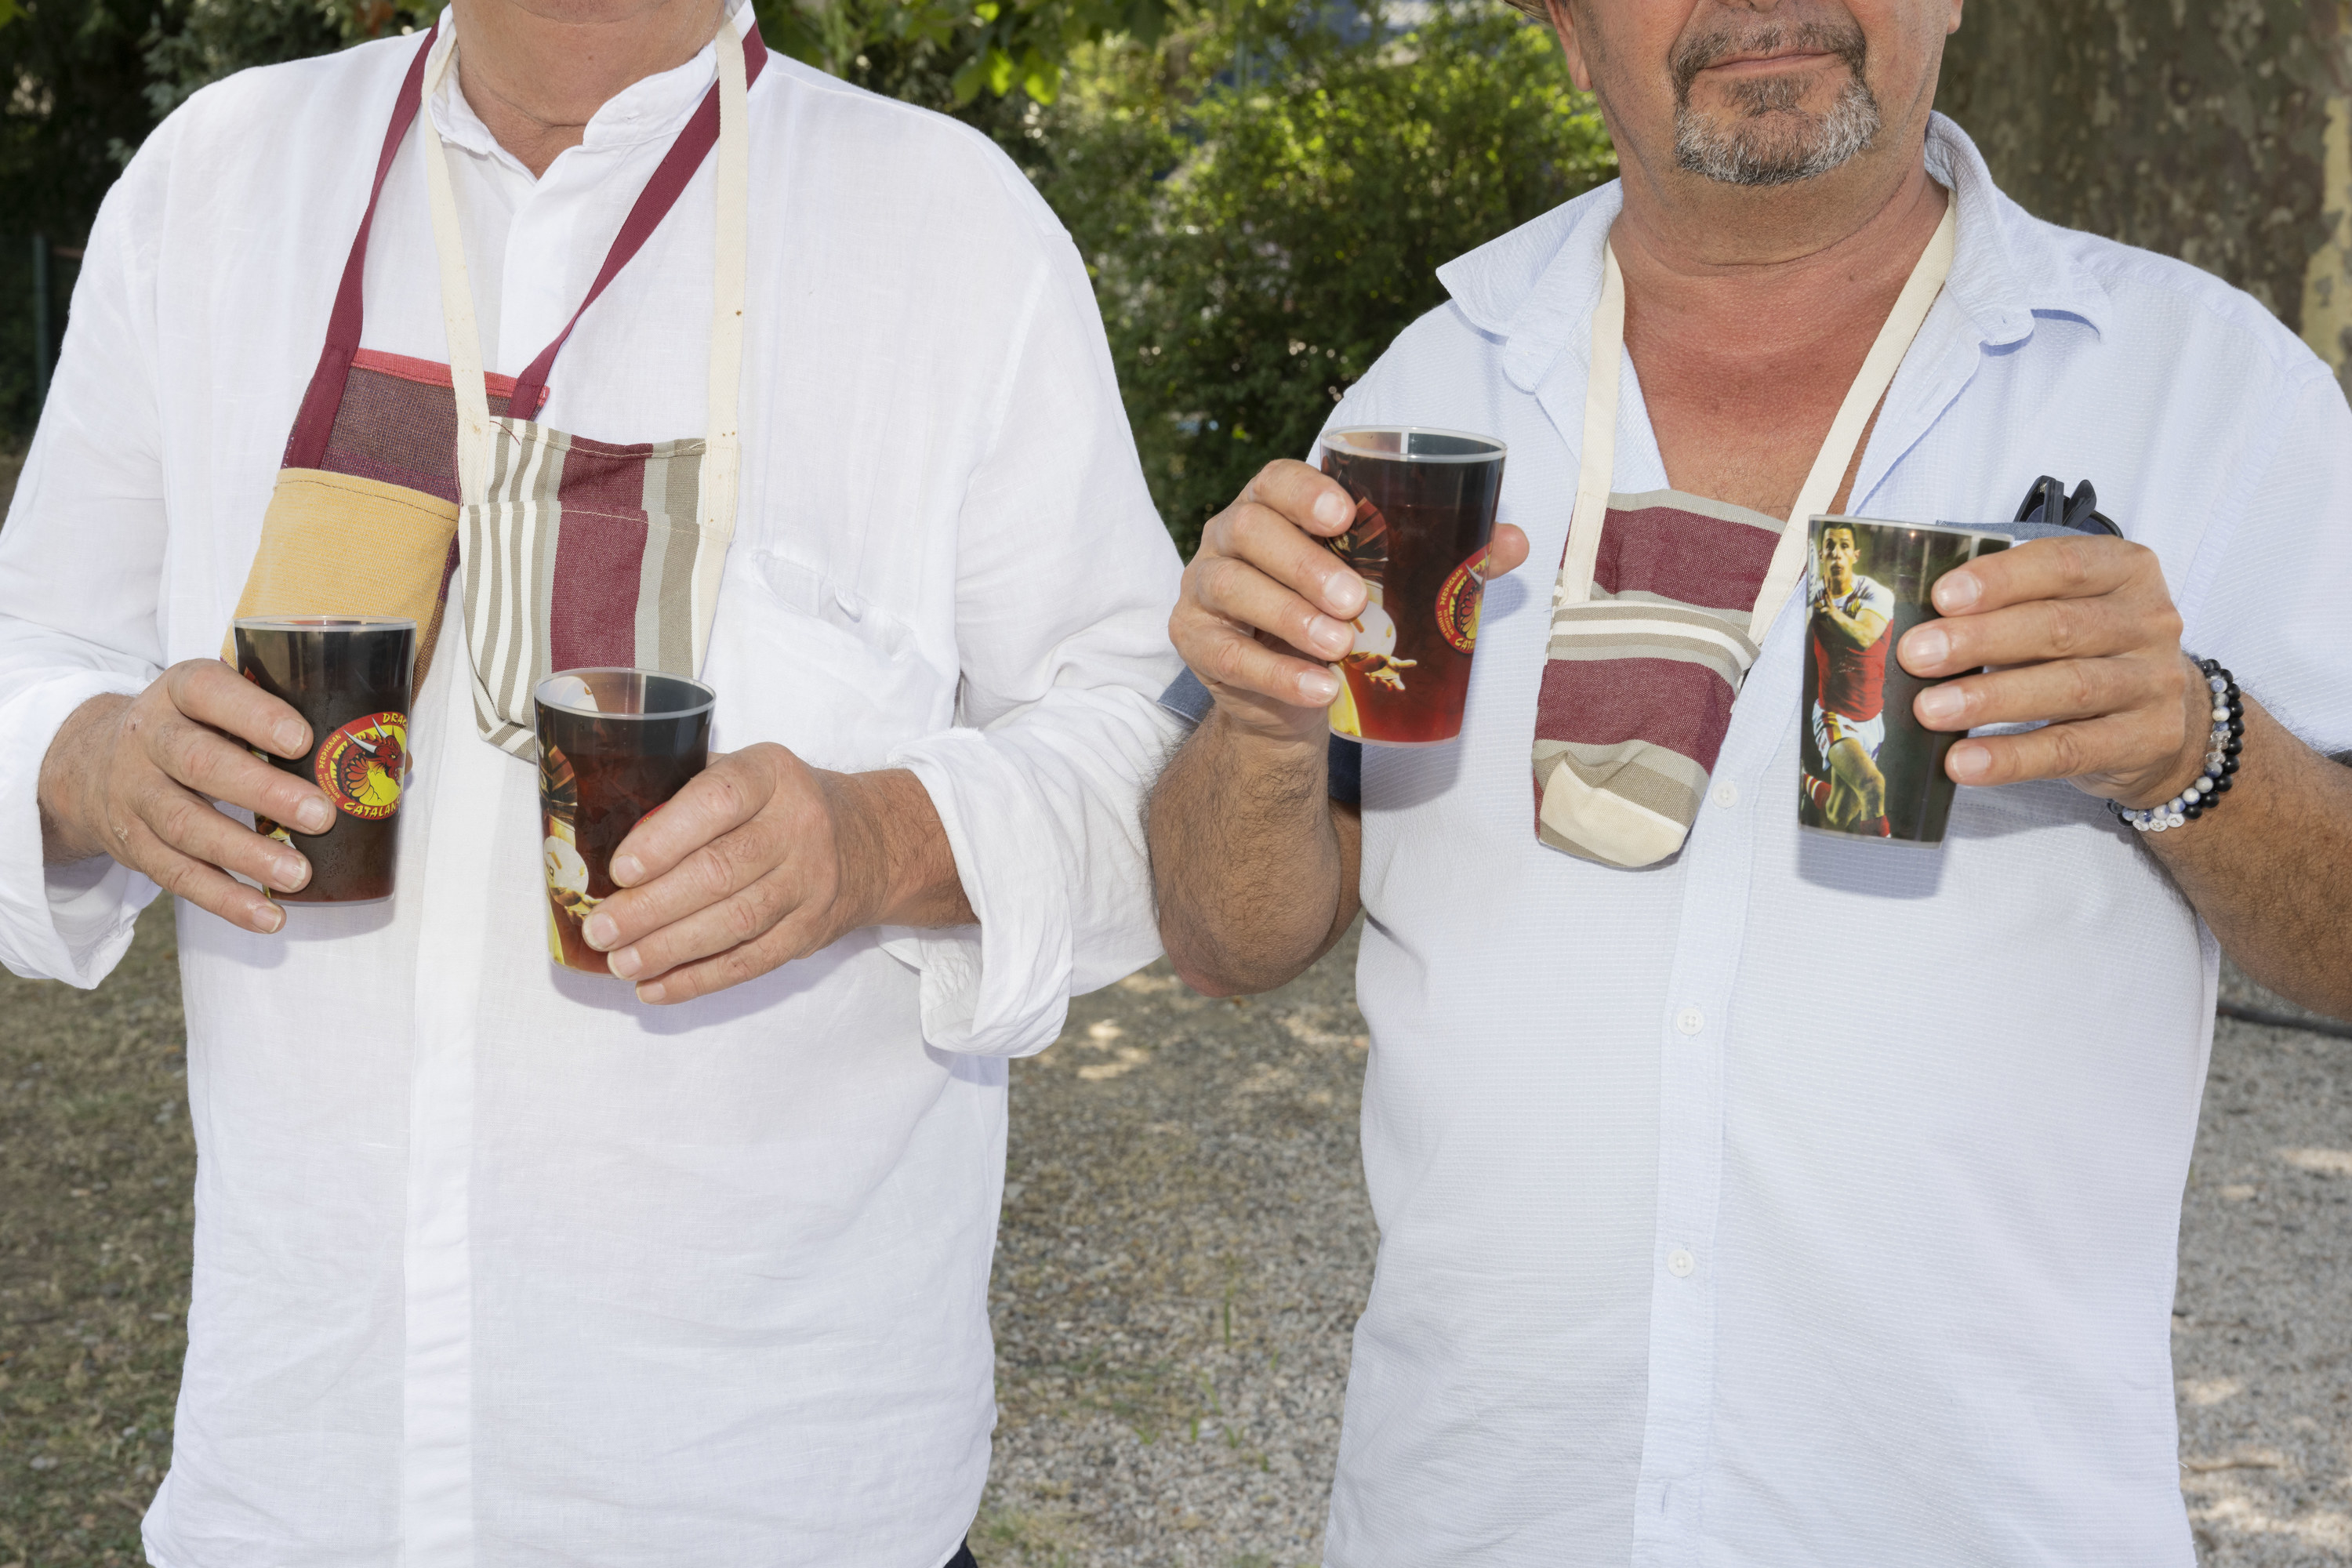 Two men holding beverages during the festival